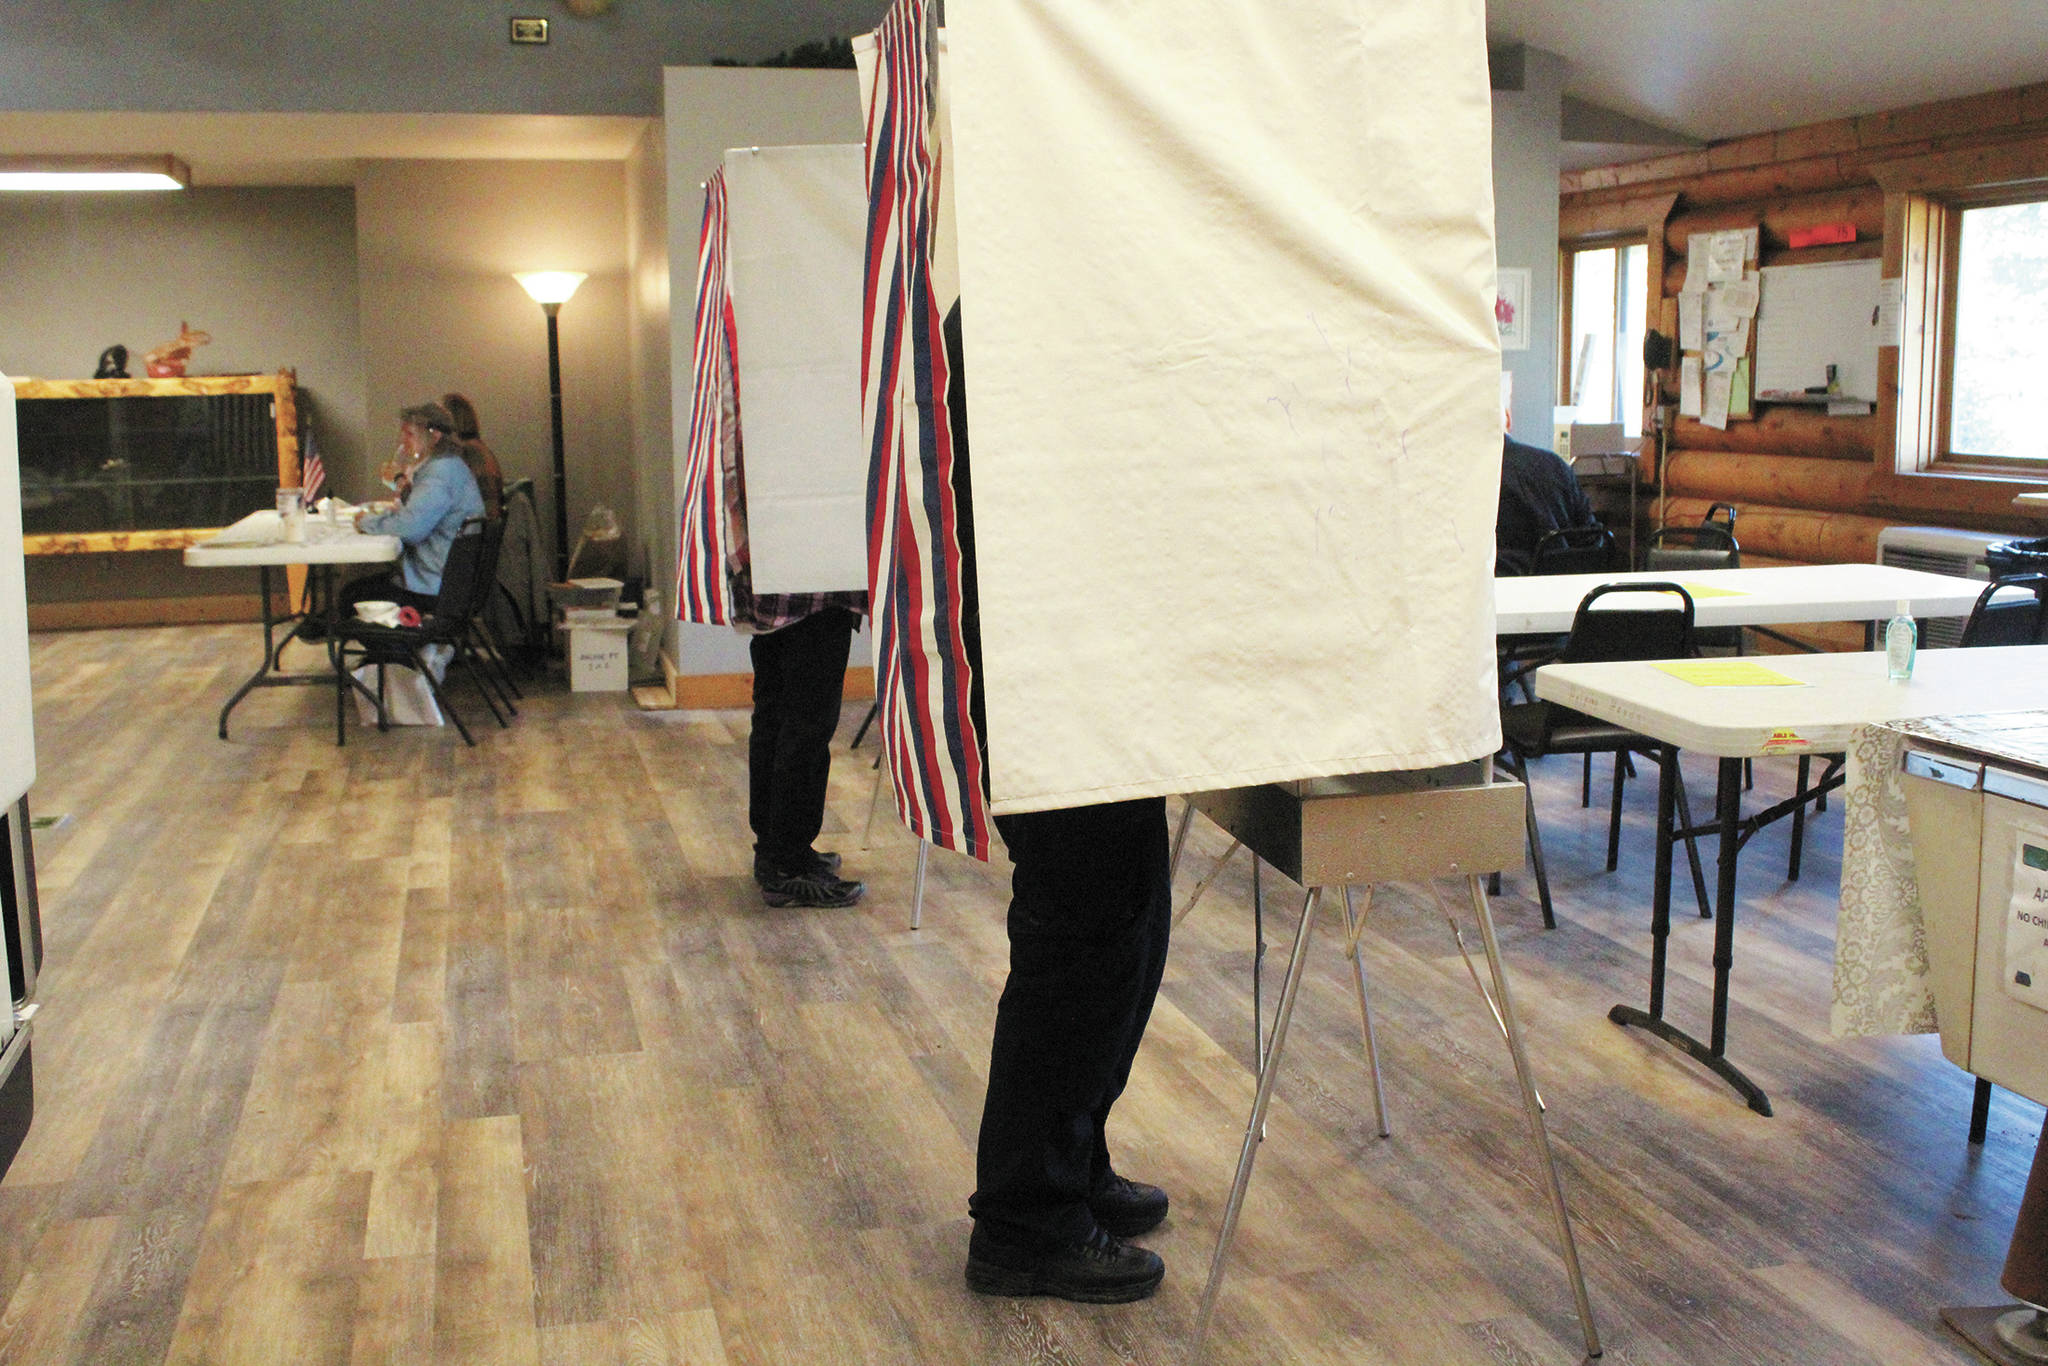 Residents cast their votes in the regular municipal election Tuesday, Oct. 6, 2020 at the Anchor Point Senior Center in Anchor Point, Alaska. (Photo by Megan Pacer/Homer News)